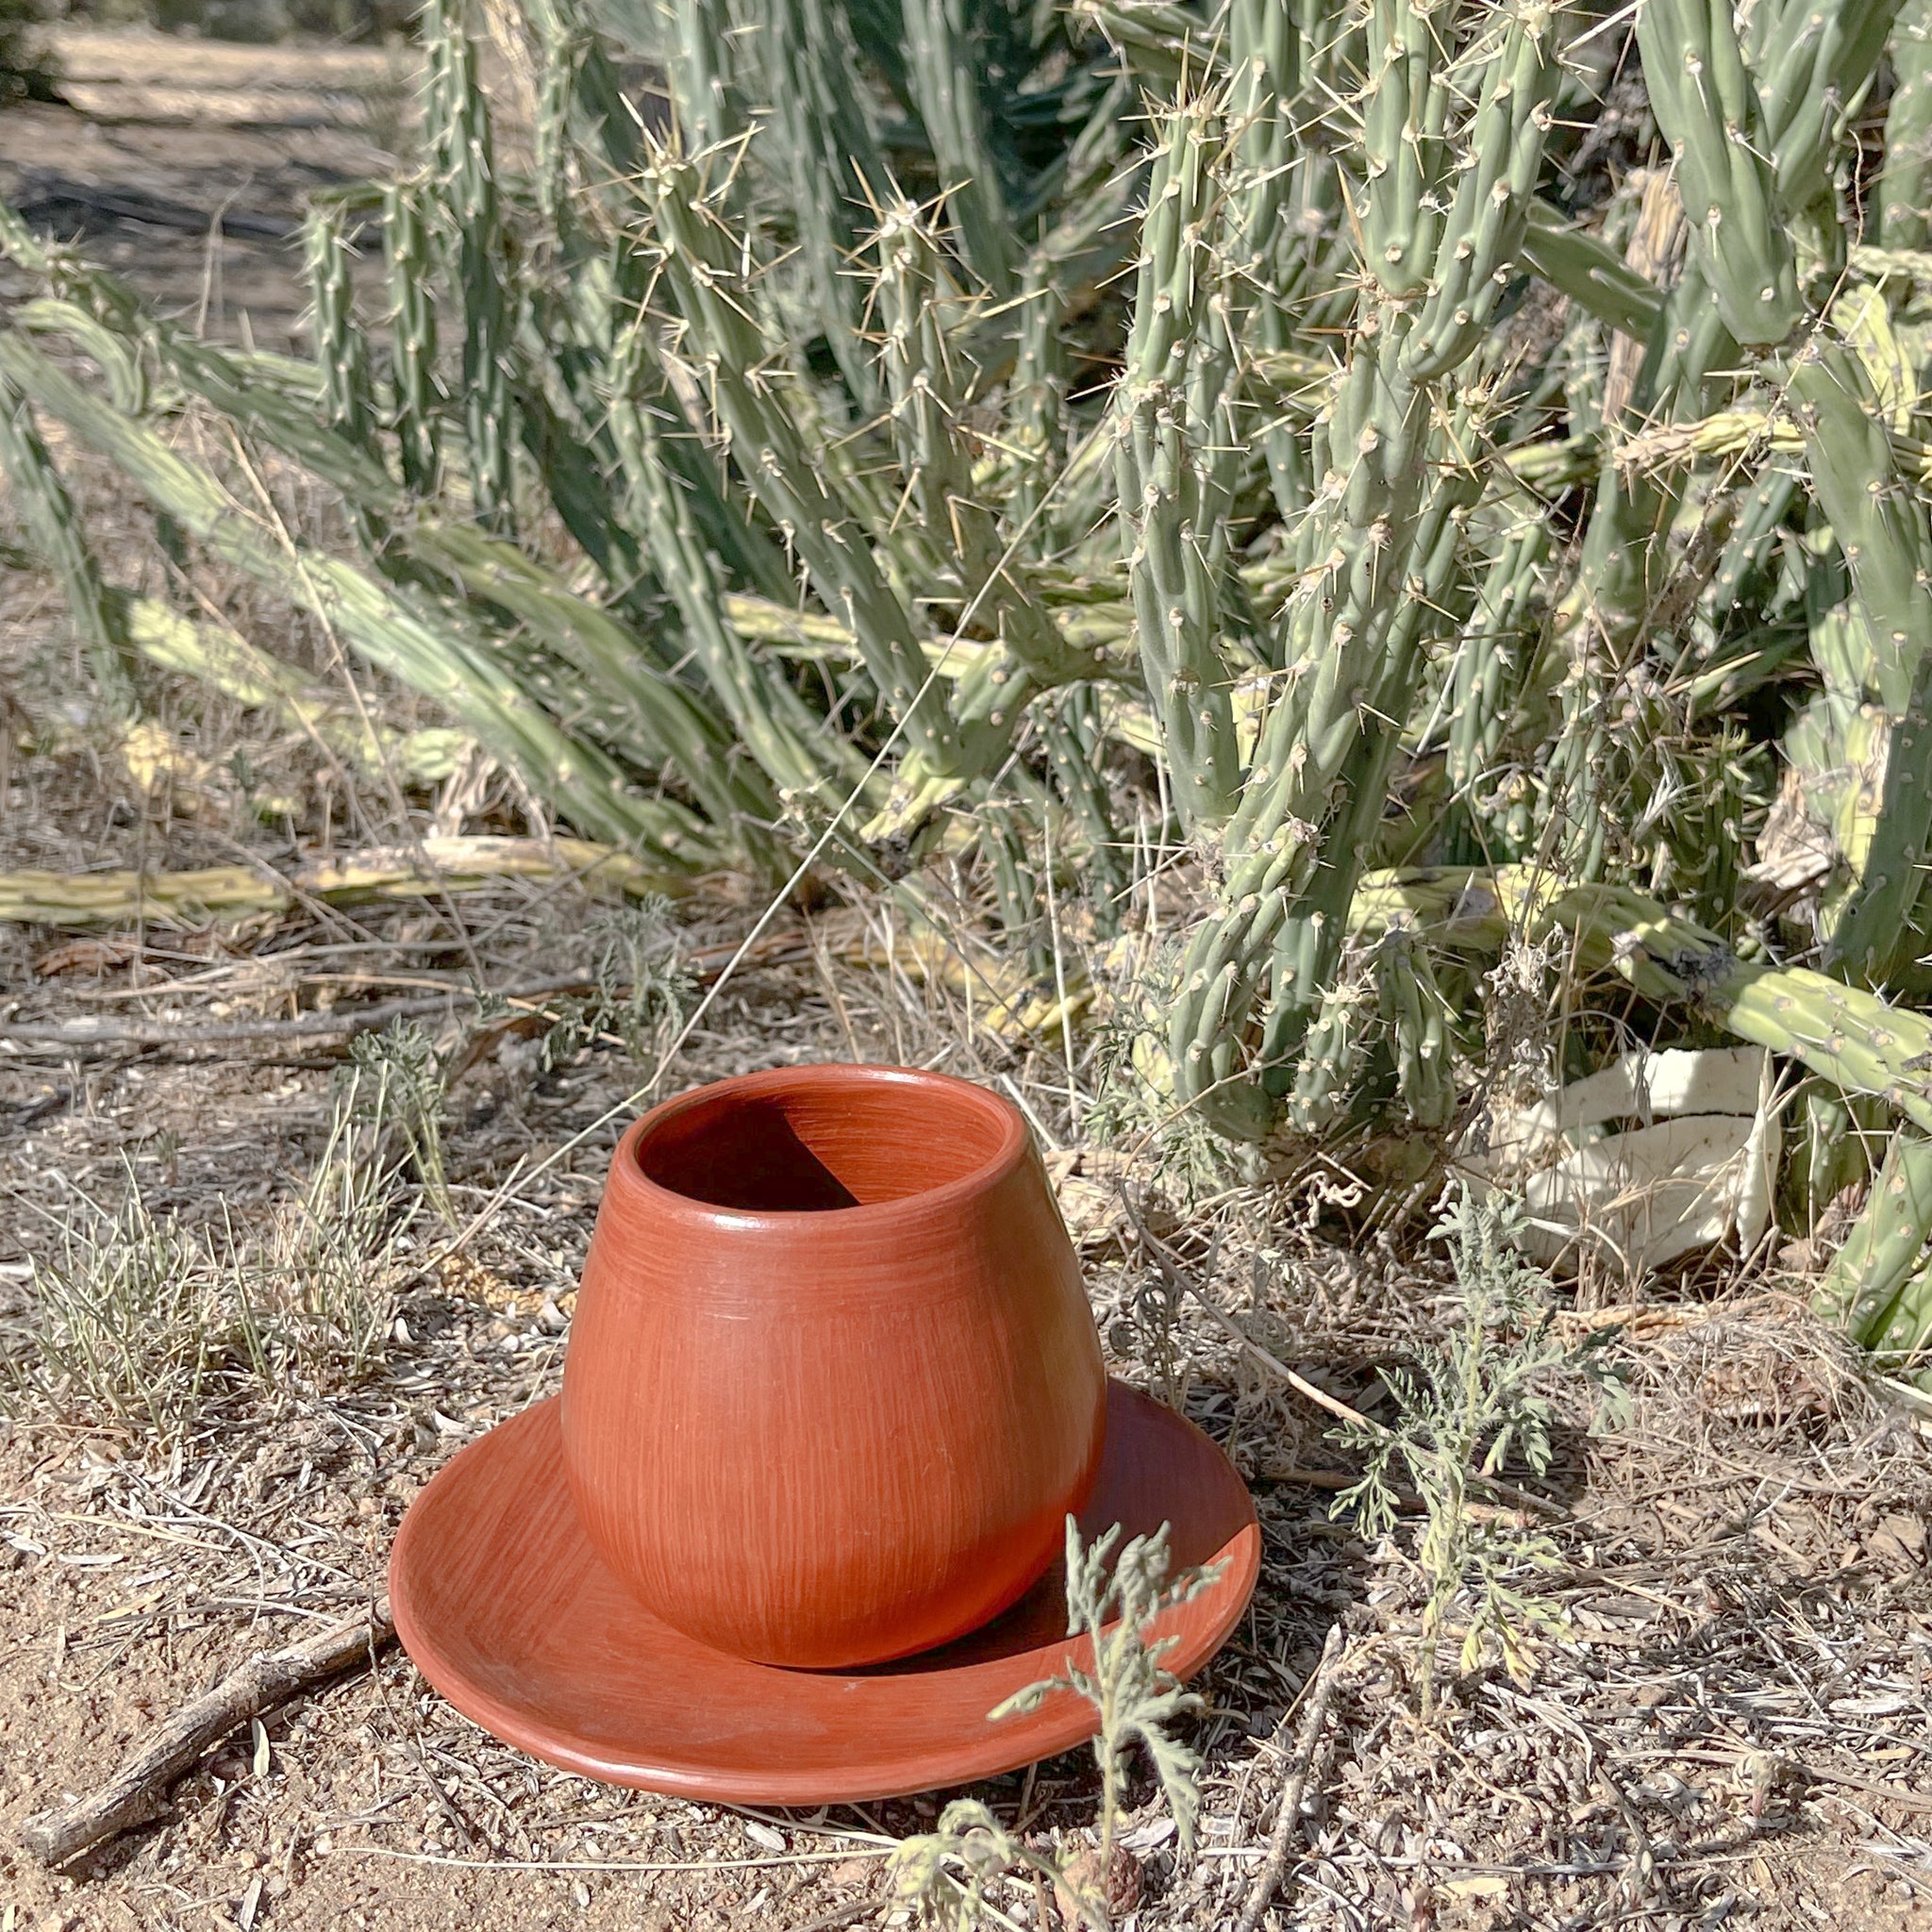 A Oaxaca red clay mug and plate set in front of a cactus plant in the desert.